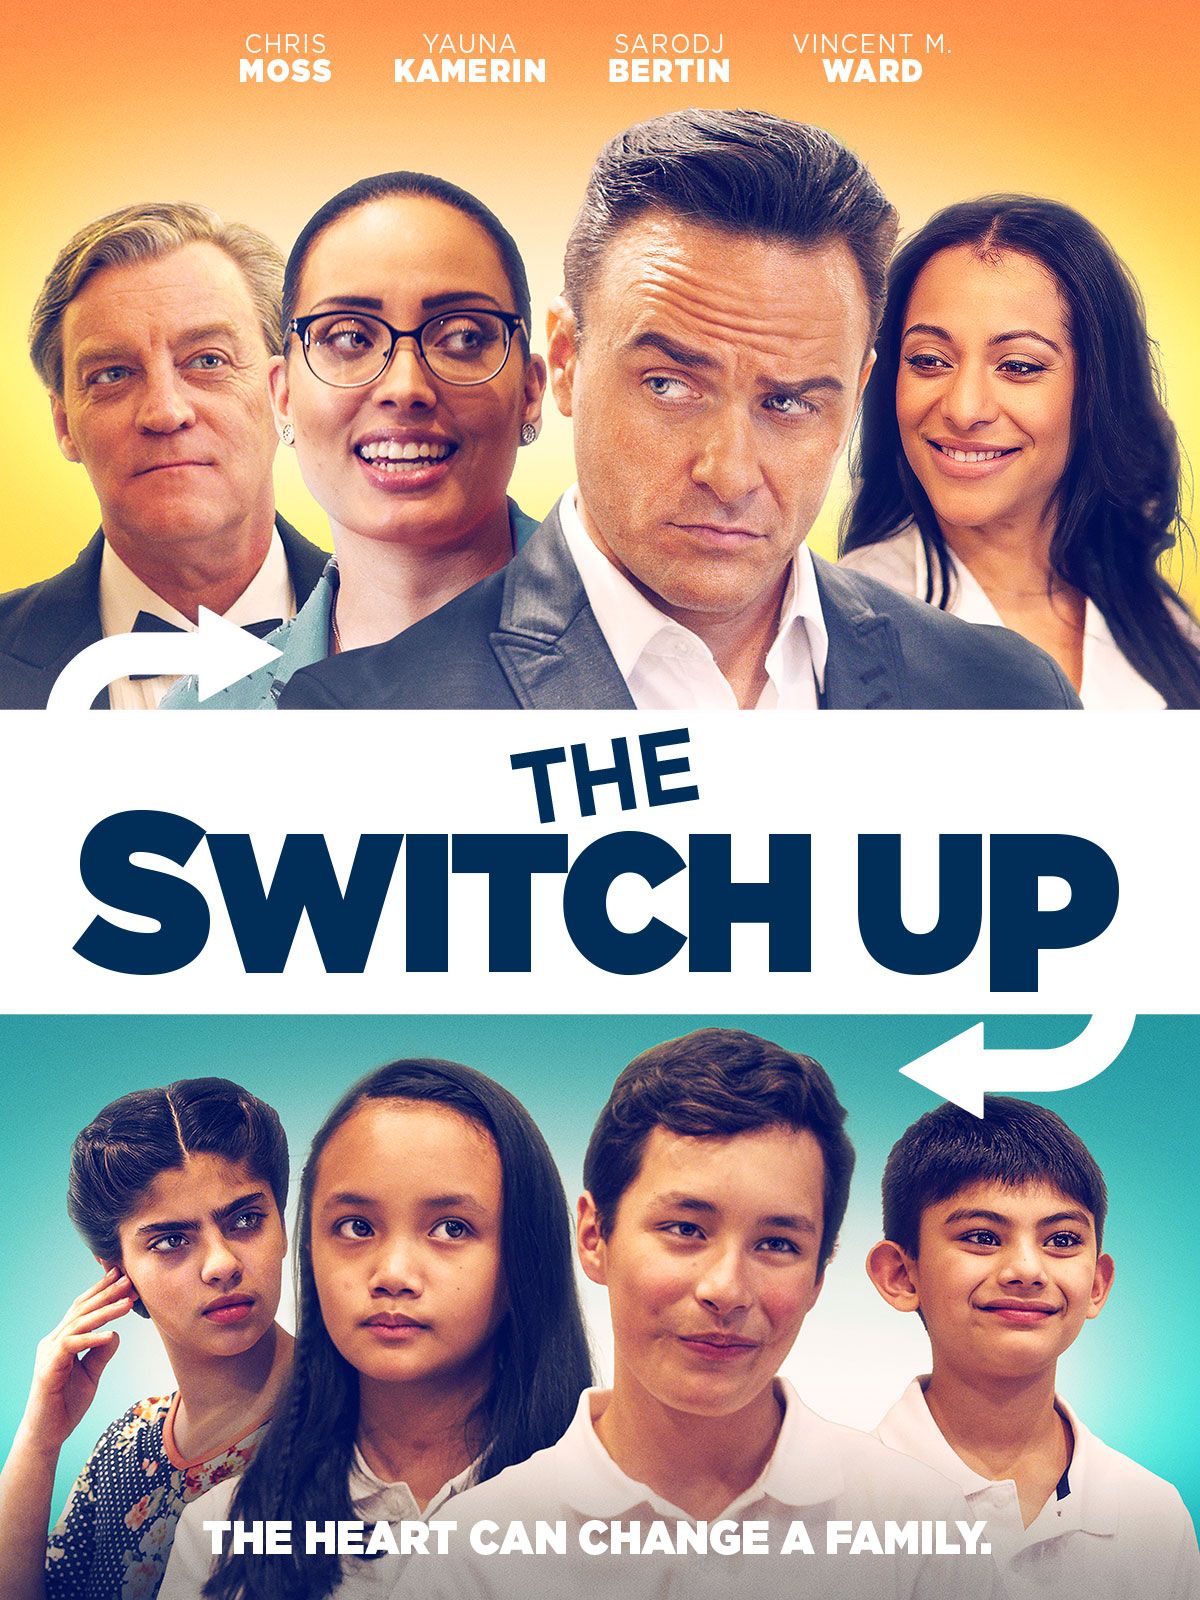 Keyart for the movie The Switch Up